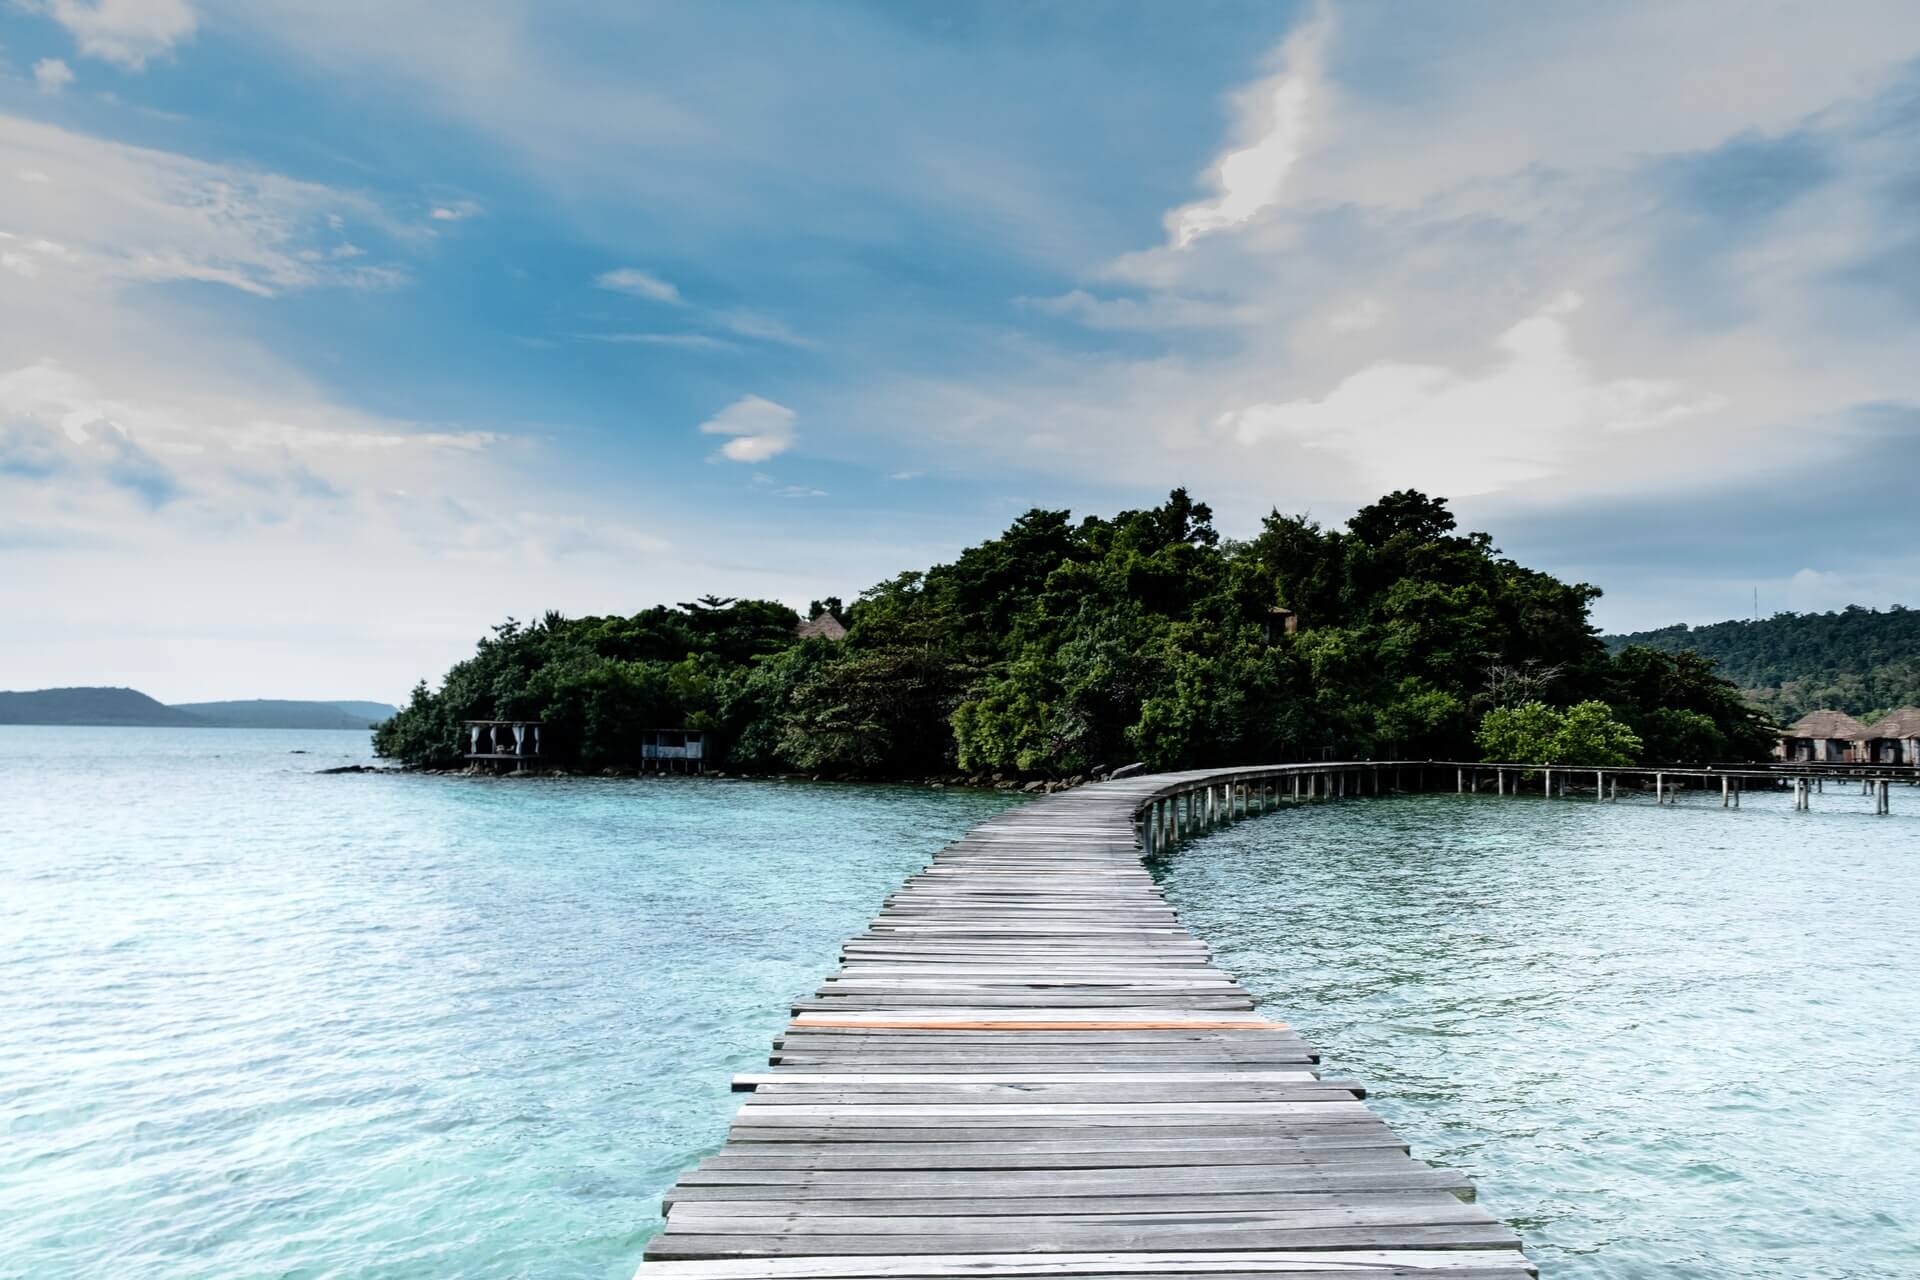 A jetty at a beautiful beach in Sihanoukville, Cambodia